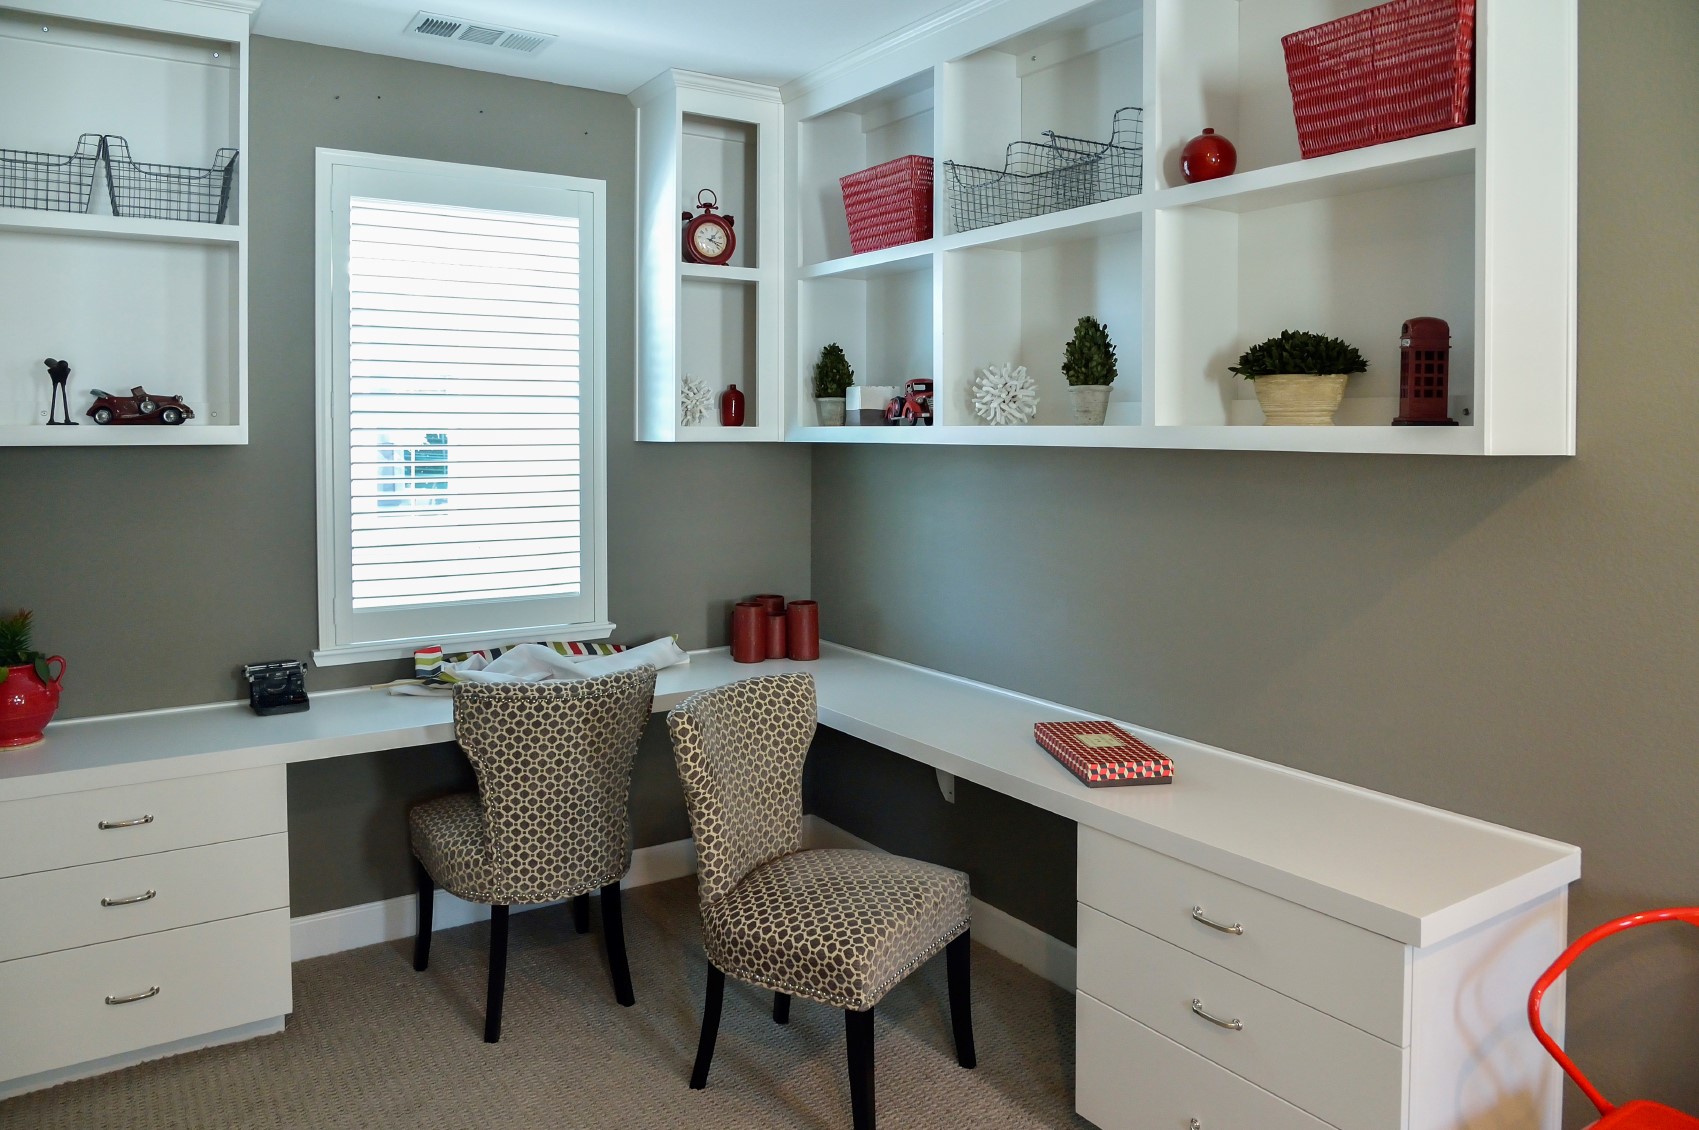 8 signs that you could use a professional home organizer